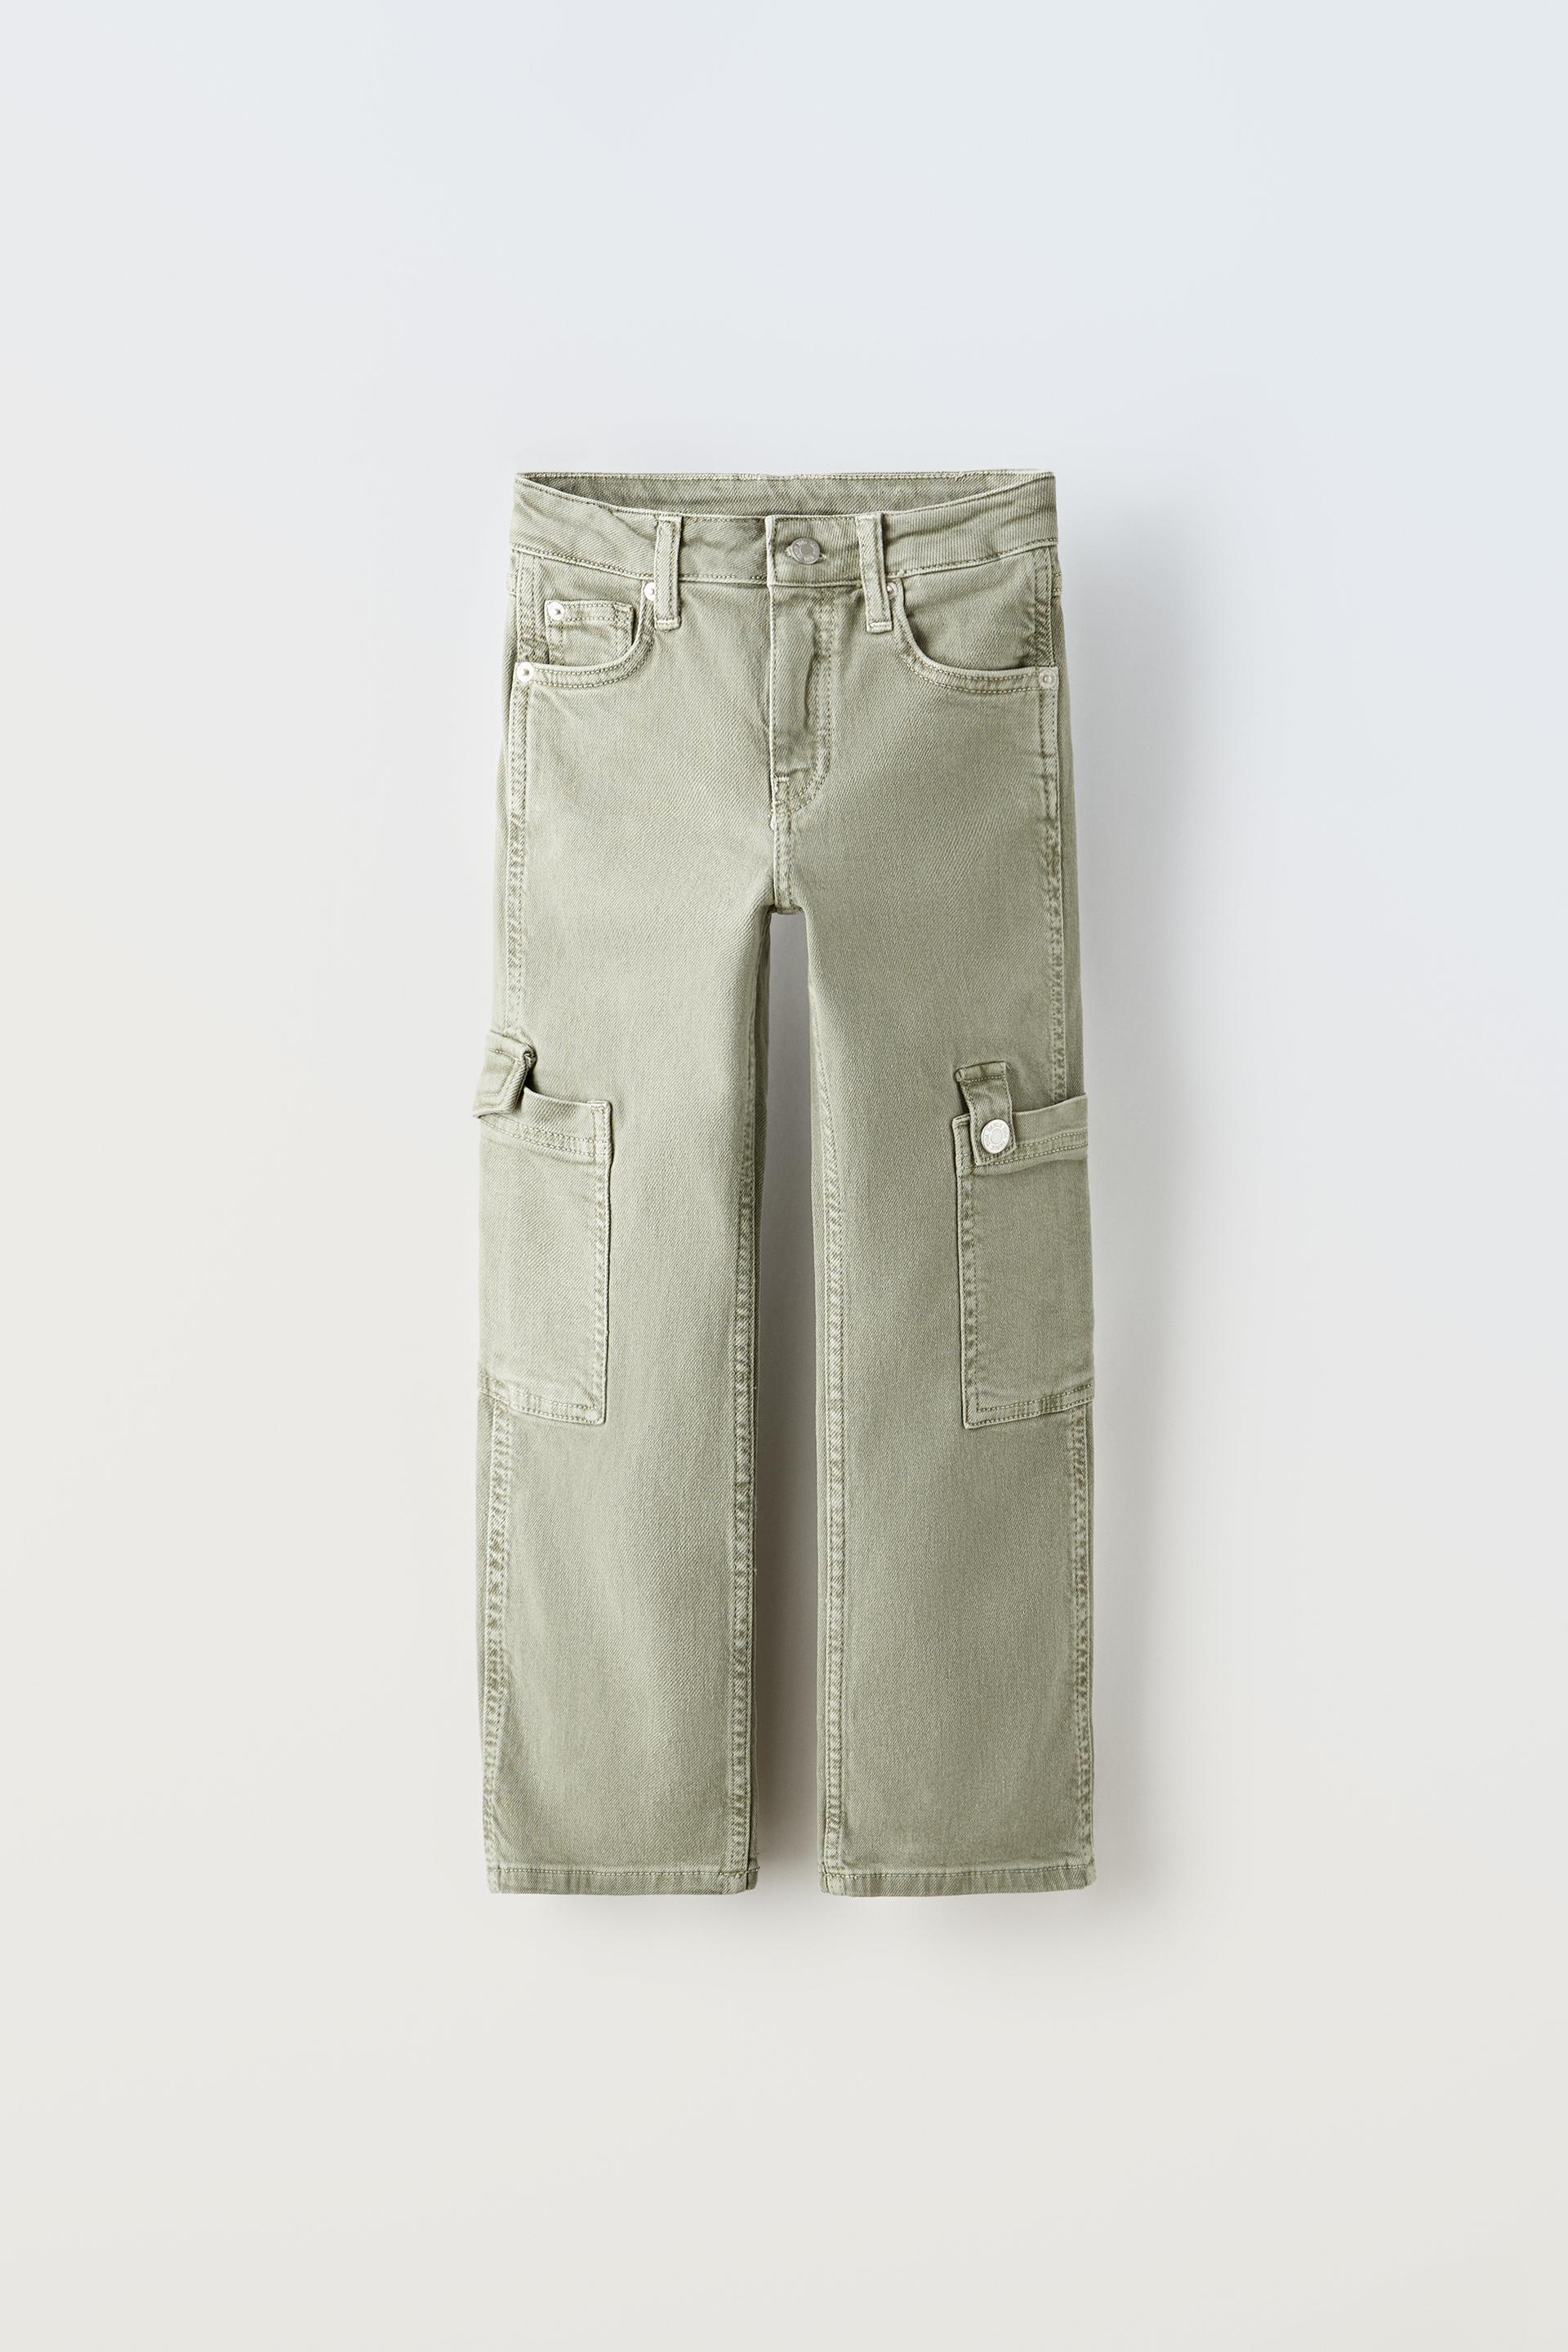 THE NEW CARGO JEANS